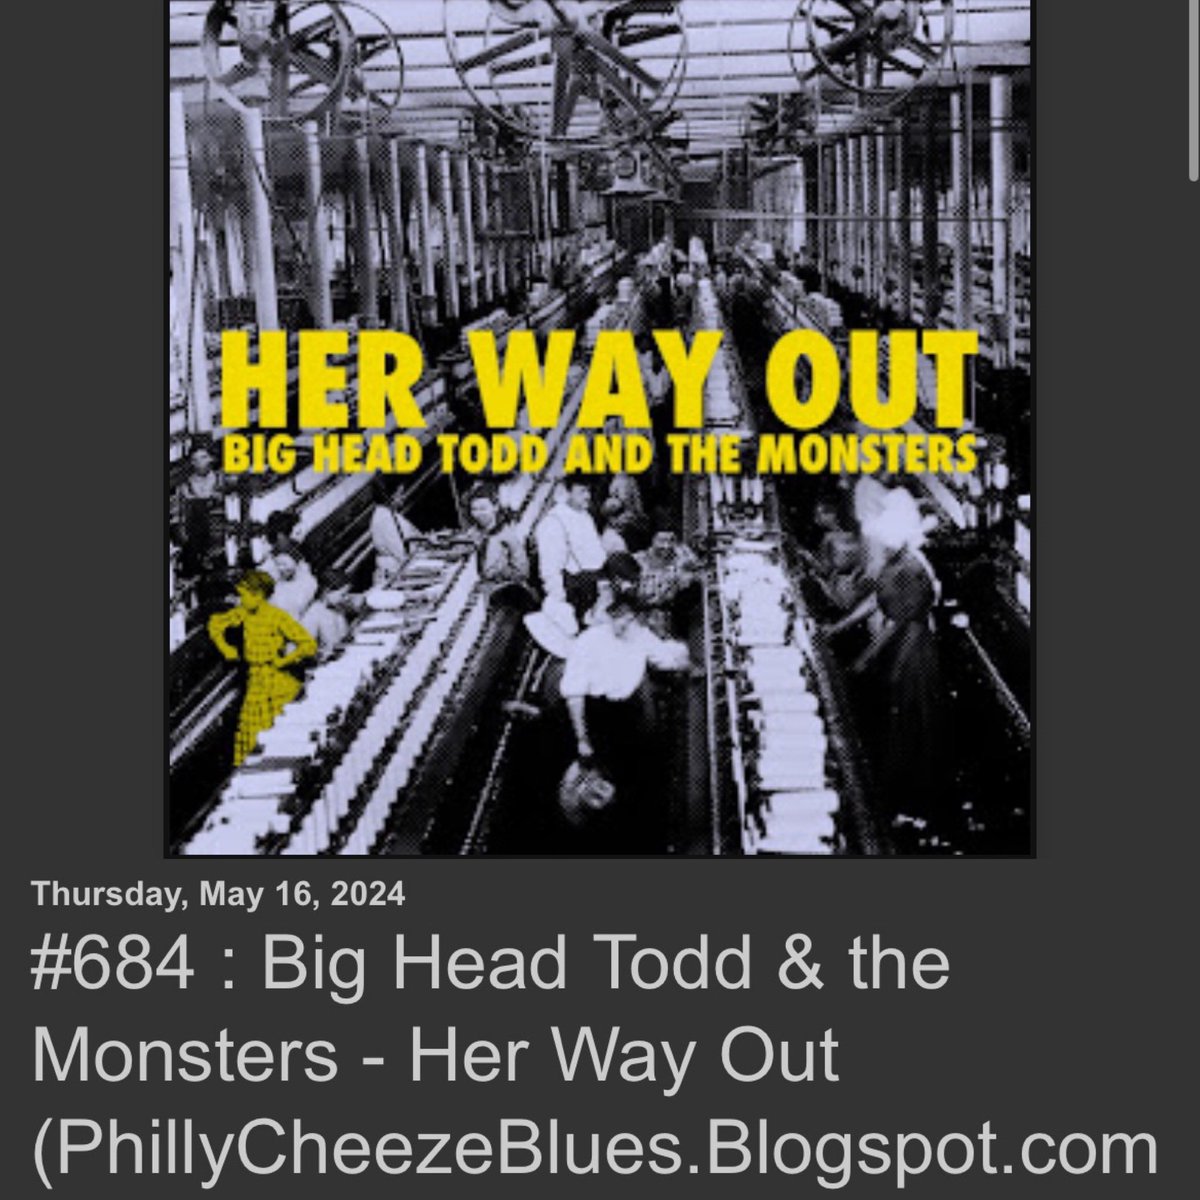 PhillyCheeze’s Rock & Blues Reviews #684 
Big Head Todd & the Monsters - Her Way Out
2024 – Big Records
Release Date : May 31, 2024

😎🎸🎶🔥

#bigheadtodd #bigheadtoddandthemonsters #bhtm #herwayout #music #rock #rockmusic 
 @deviouspdv 

phillycheezeblues.blogspot.com/2024/05/684-bi…